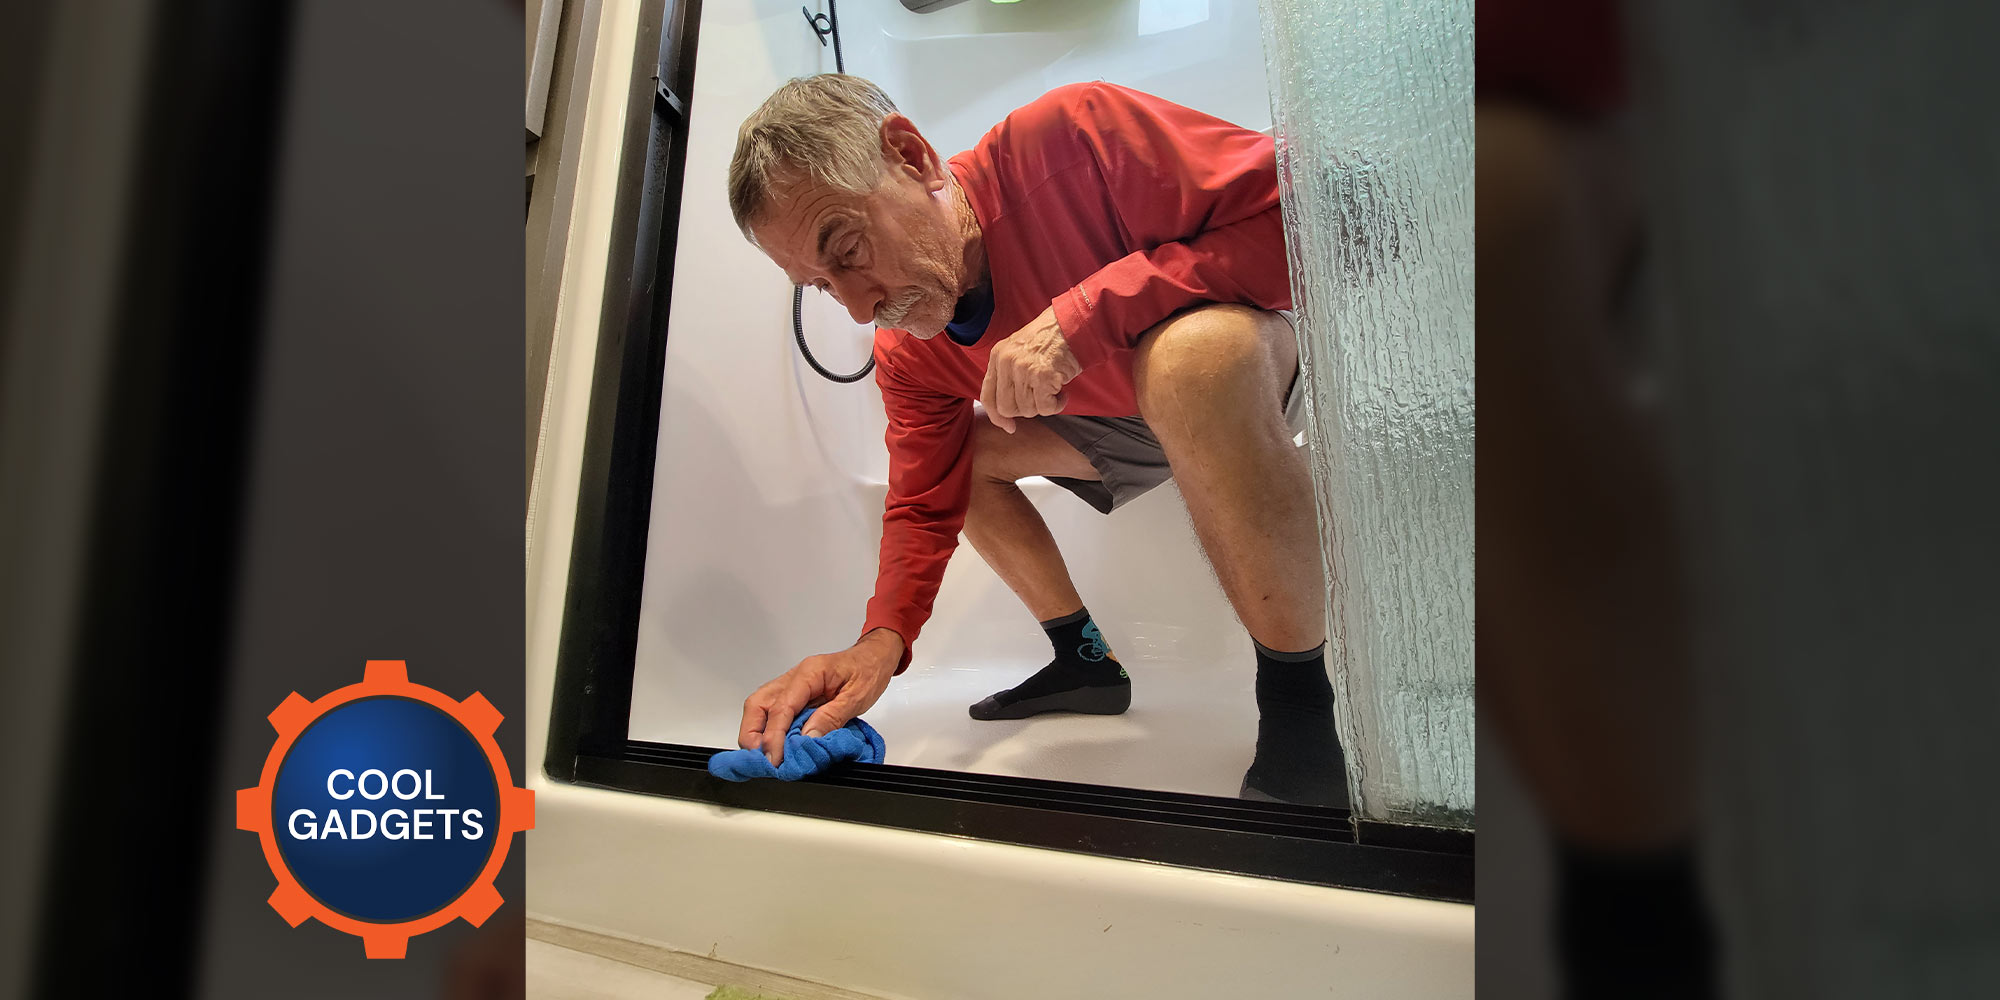 a man crouchs while inside an RV shower, using a microfiber towel to wipe the shower's sliding door tracks